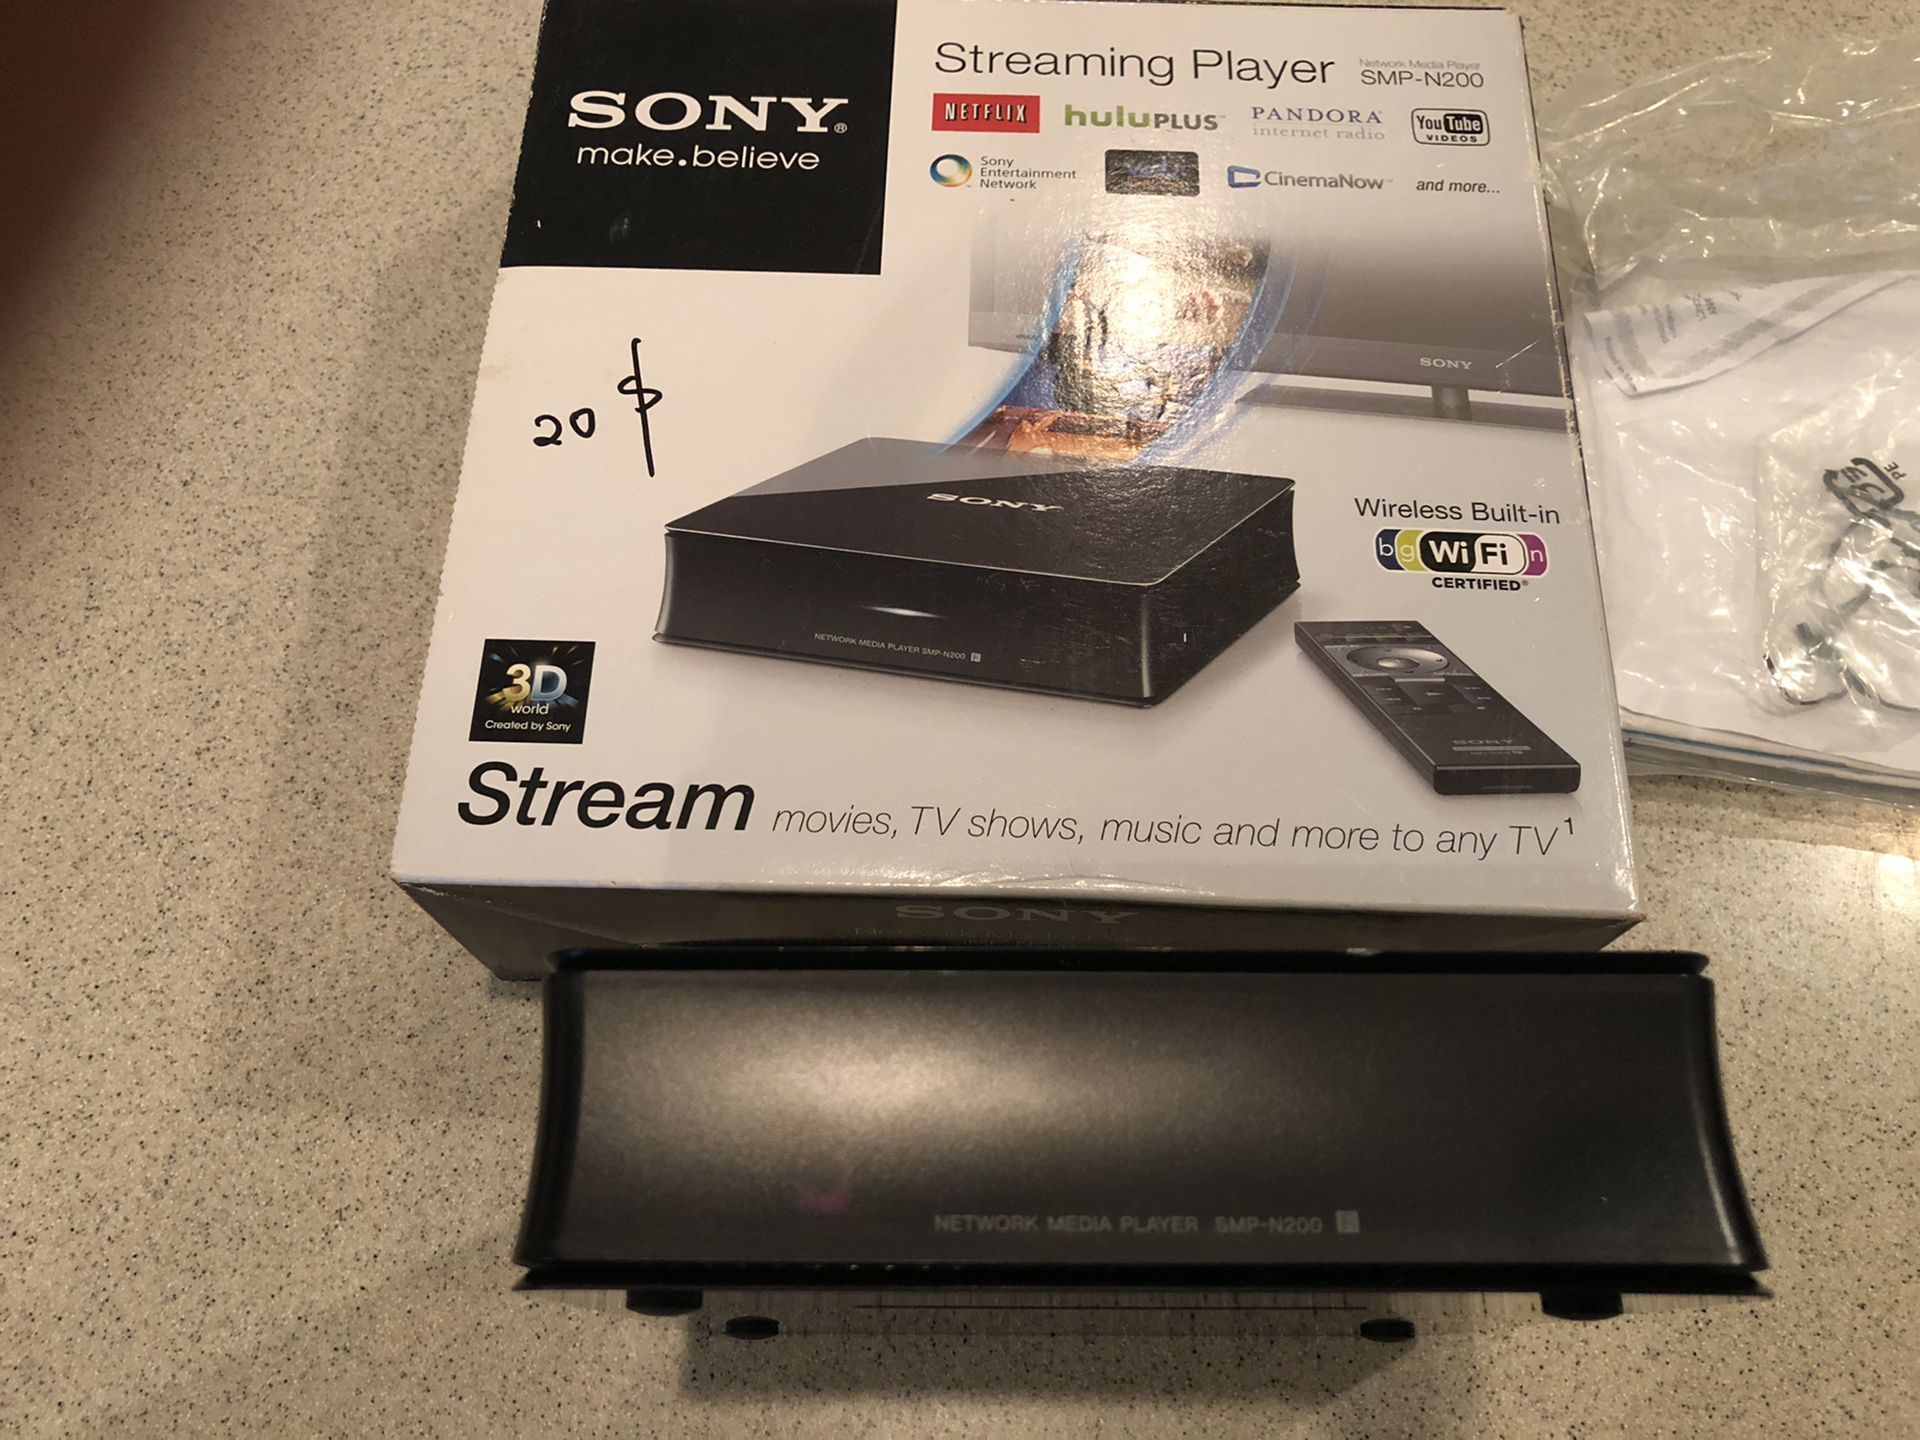 Sony streaming player